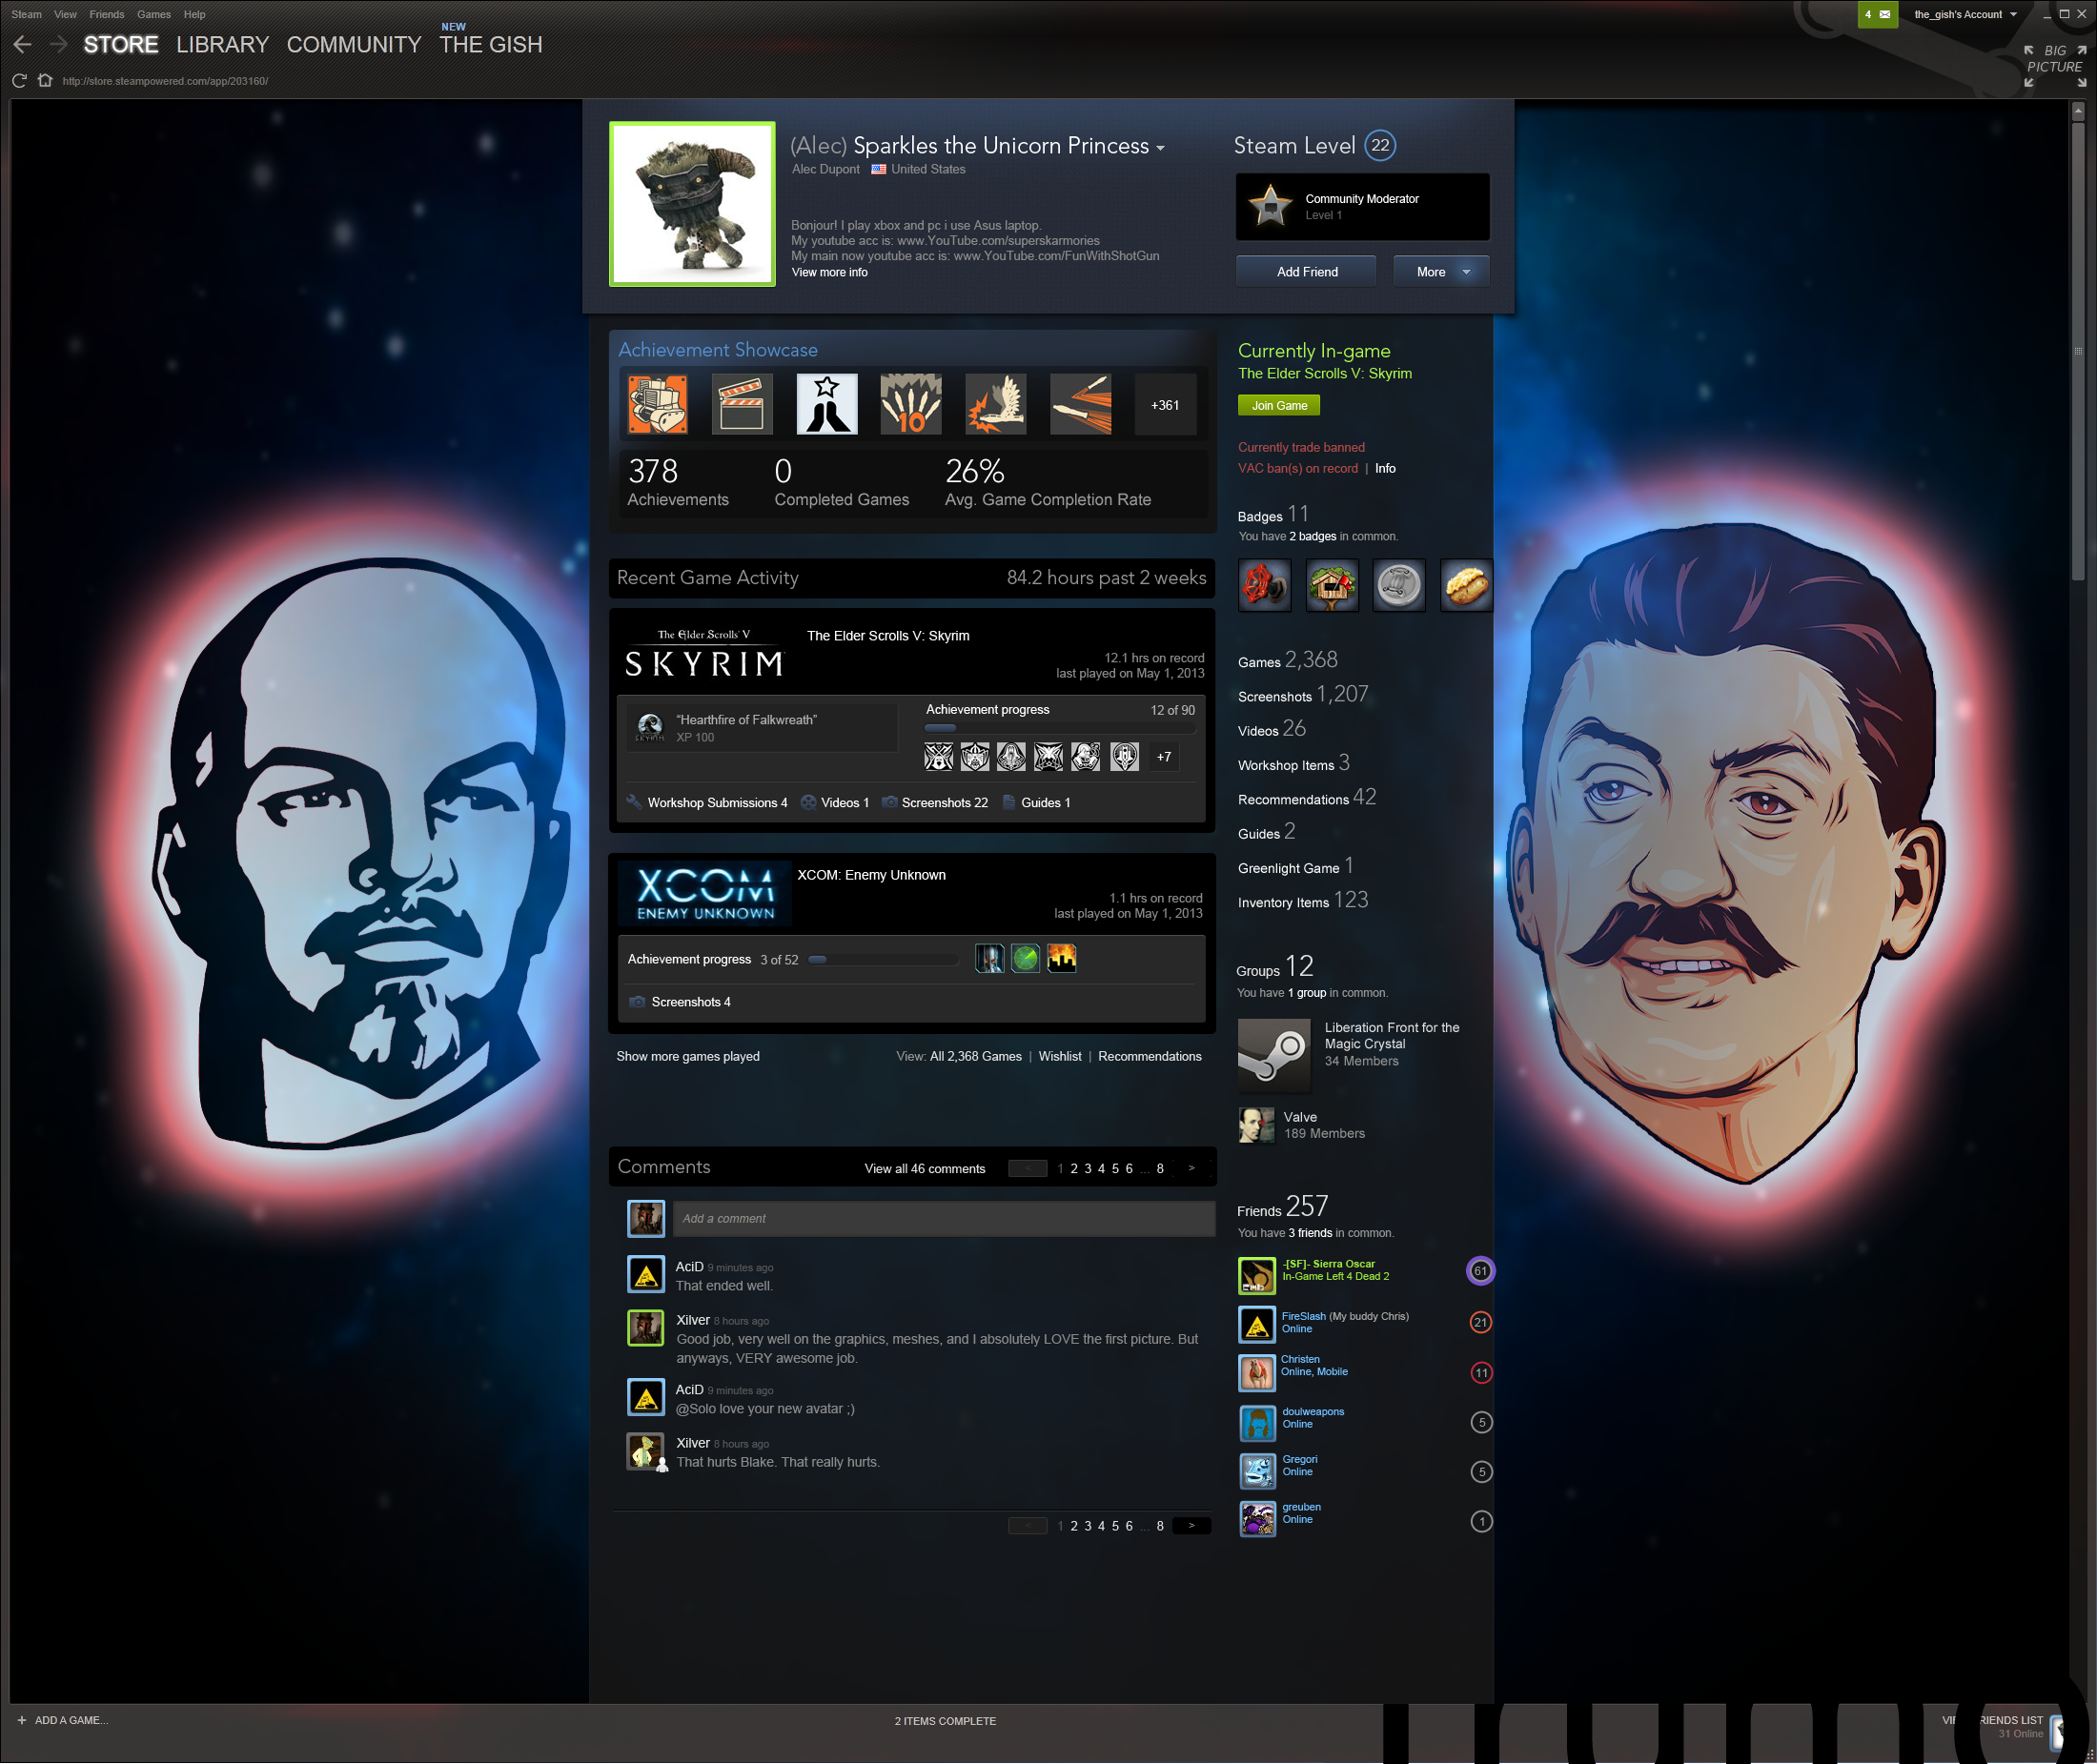 awesome steam profile pictures